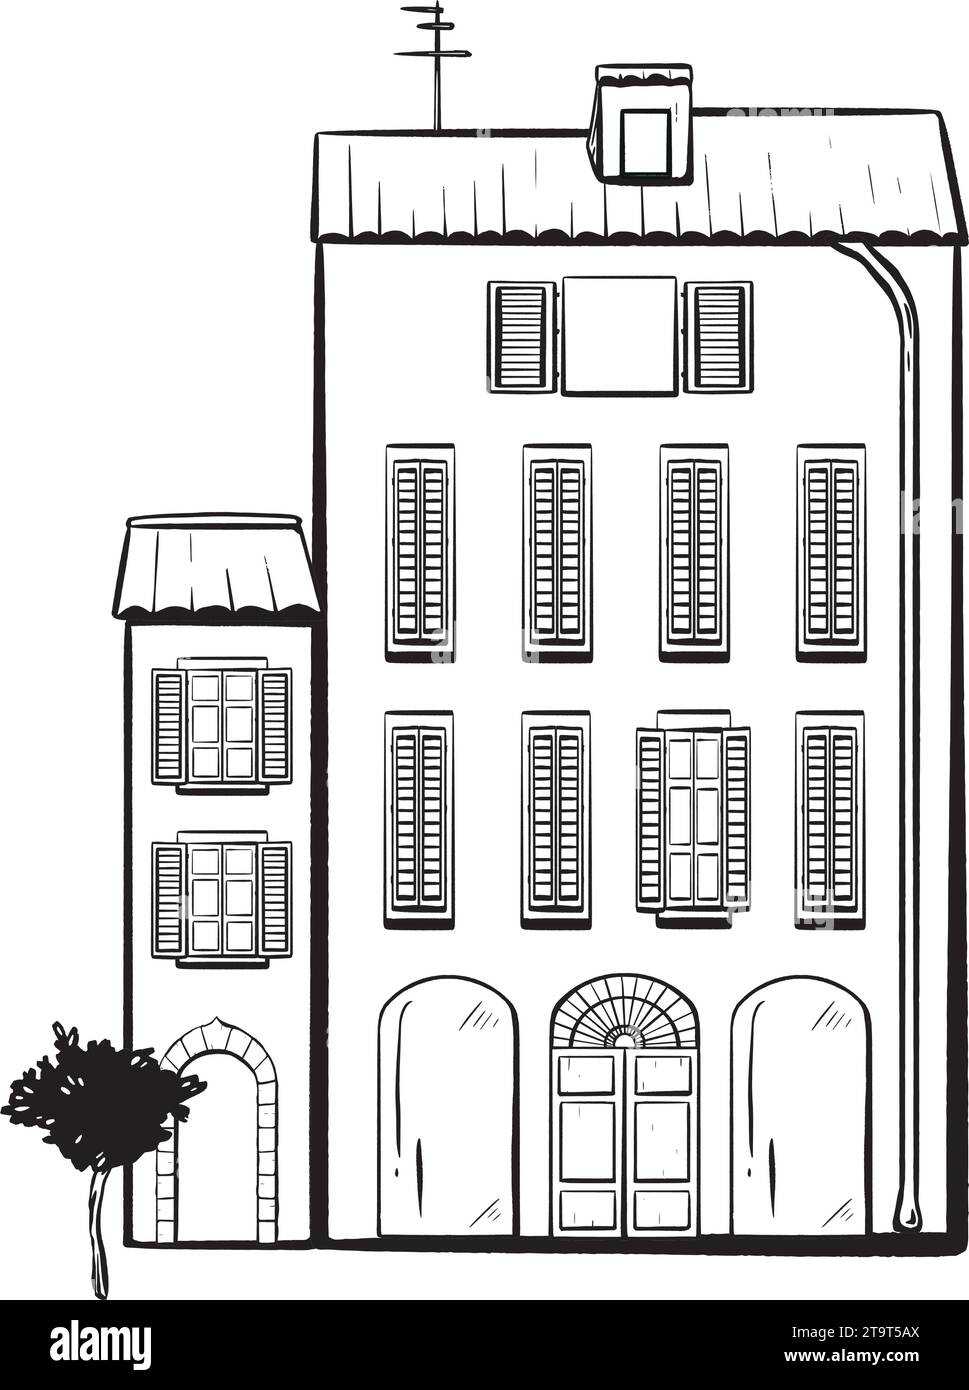 ink vector. Italian. Exterior sketch a street. entryways, windows with shutters chimneys and an antenna. Trees. Perfect for brochures travel imagery Stock Vector